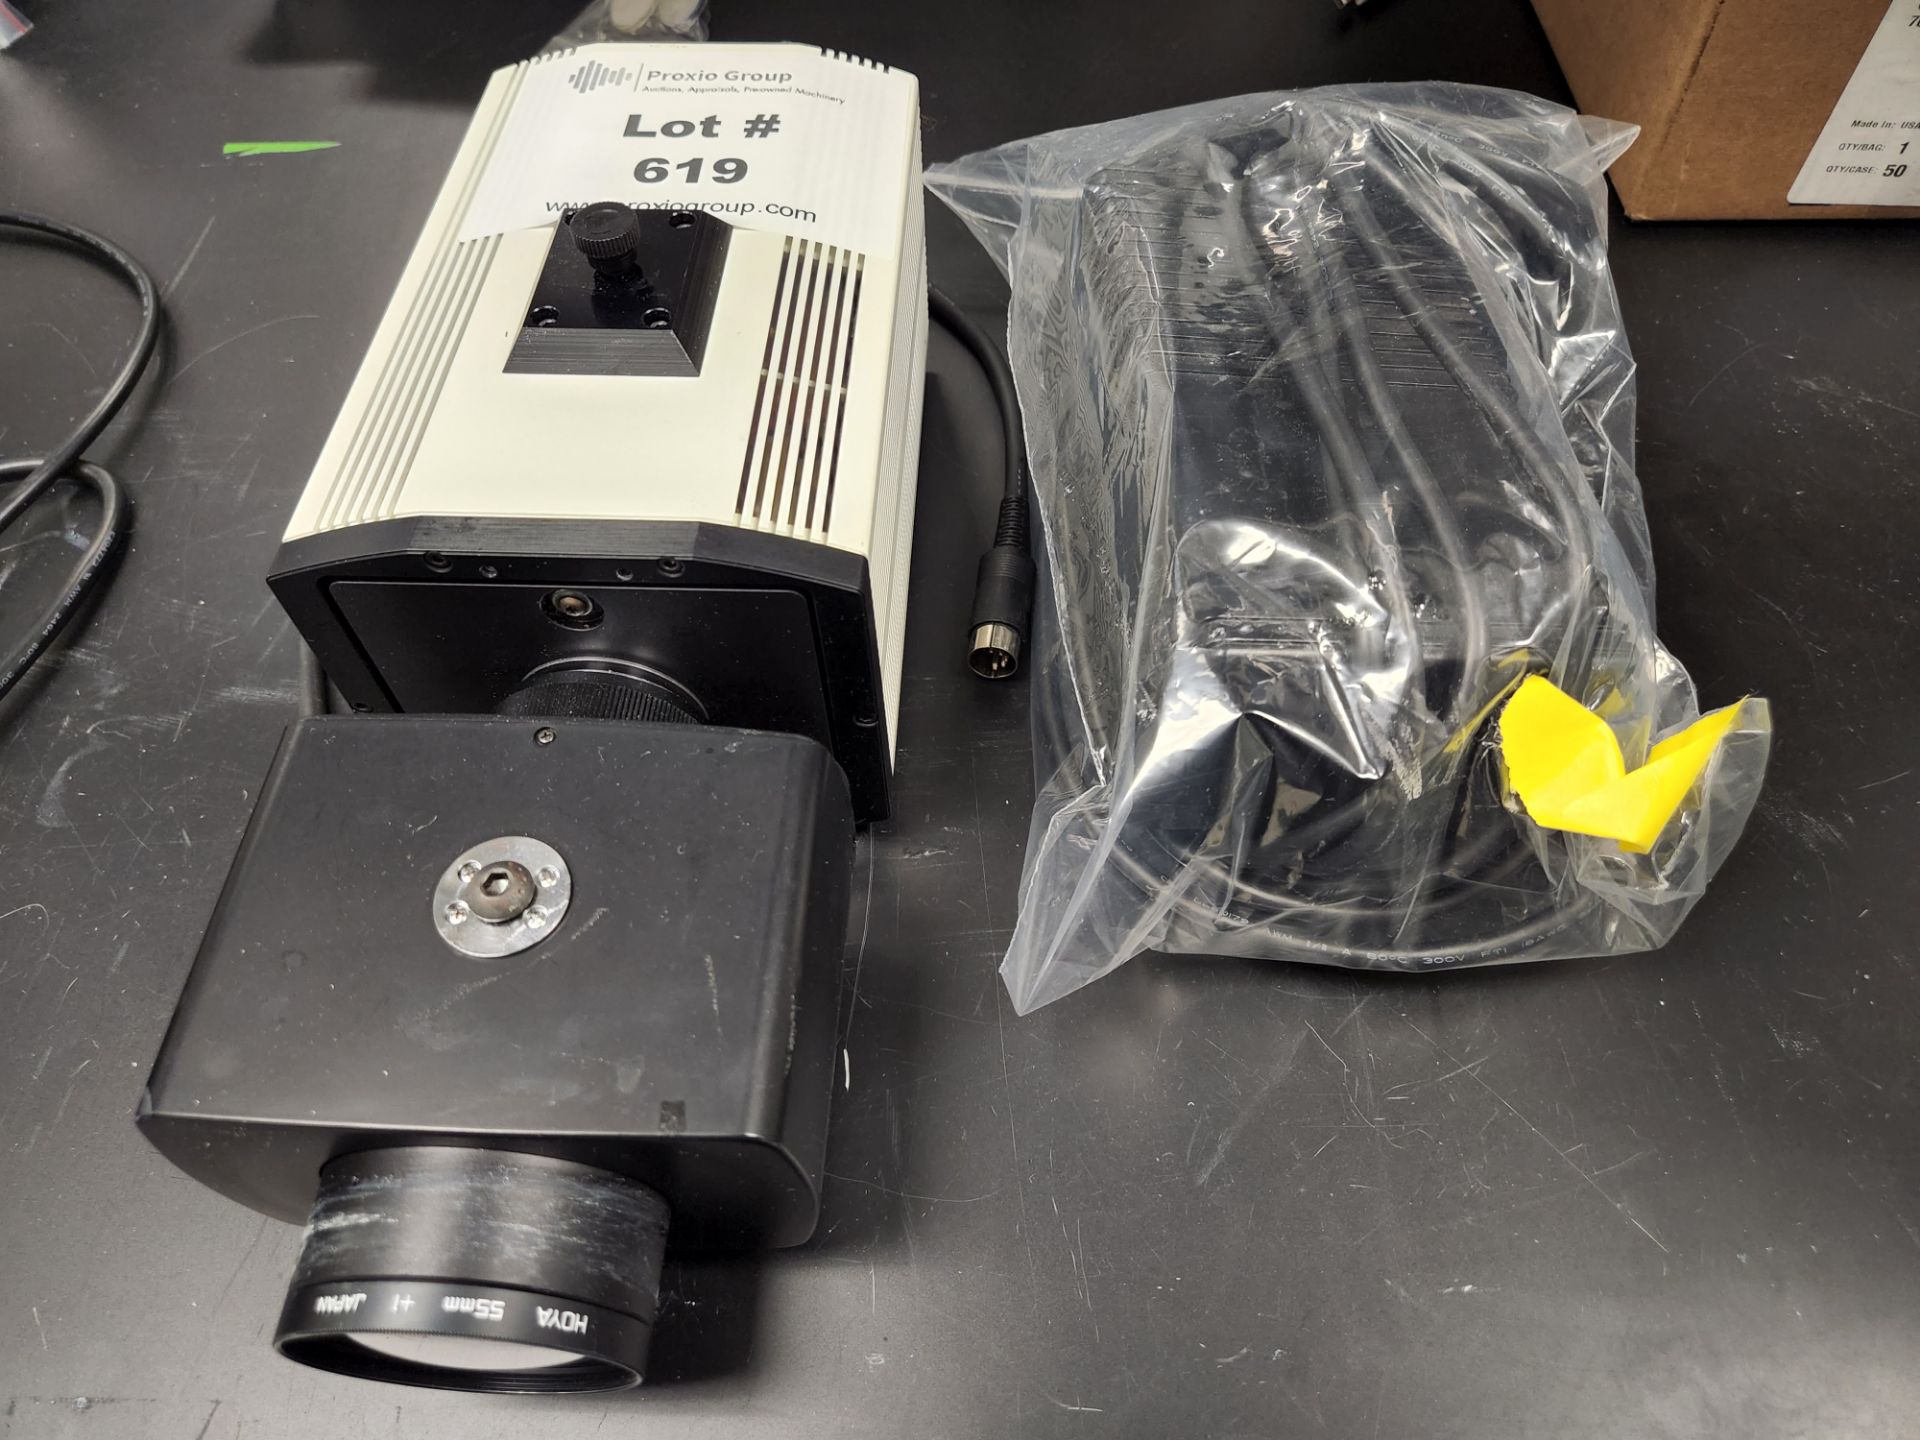 Bio-Rad Model 1708255 Camera With Lense Adapter And Power Supply (Asset I.D. # )